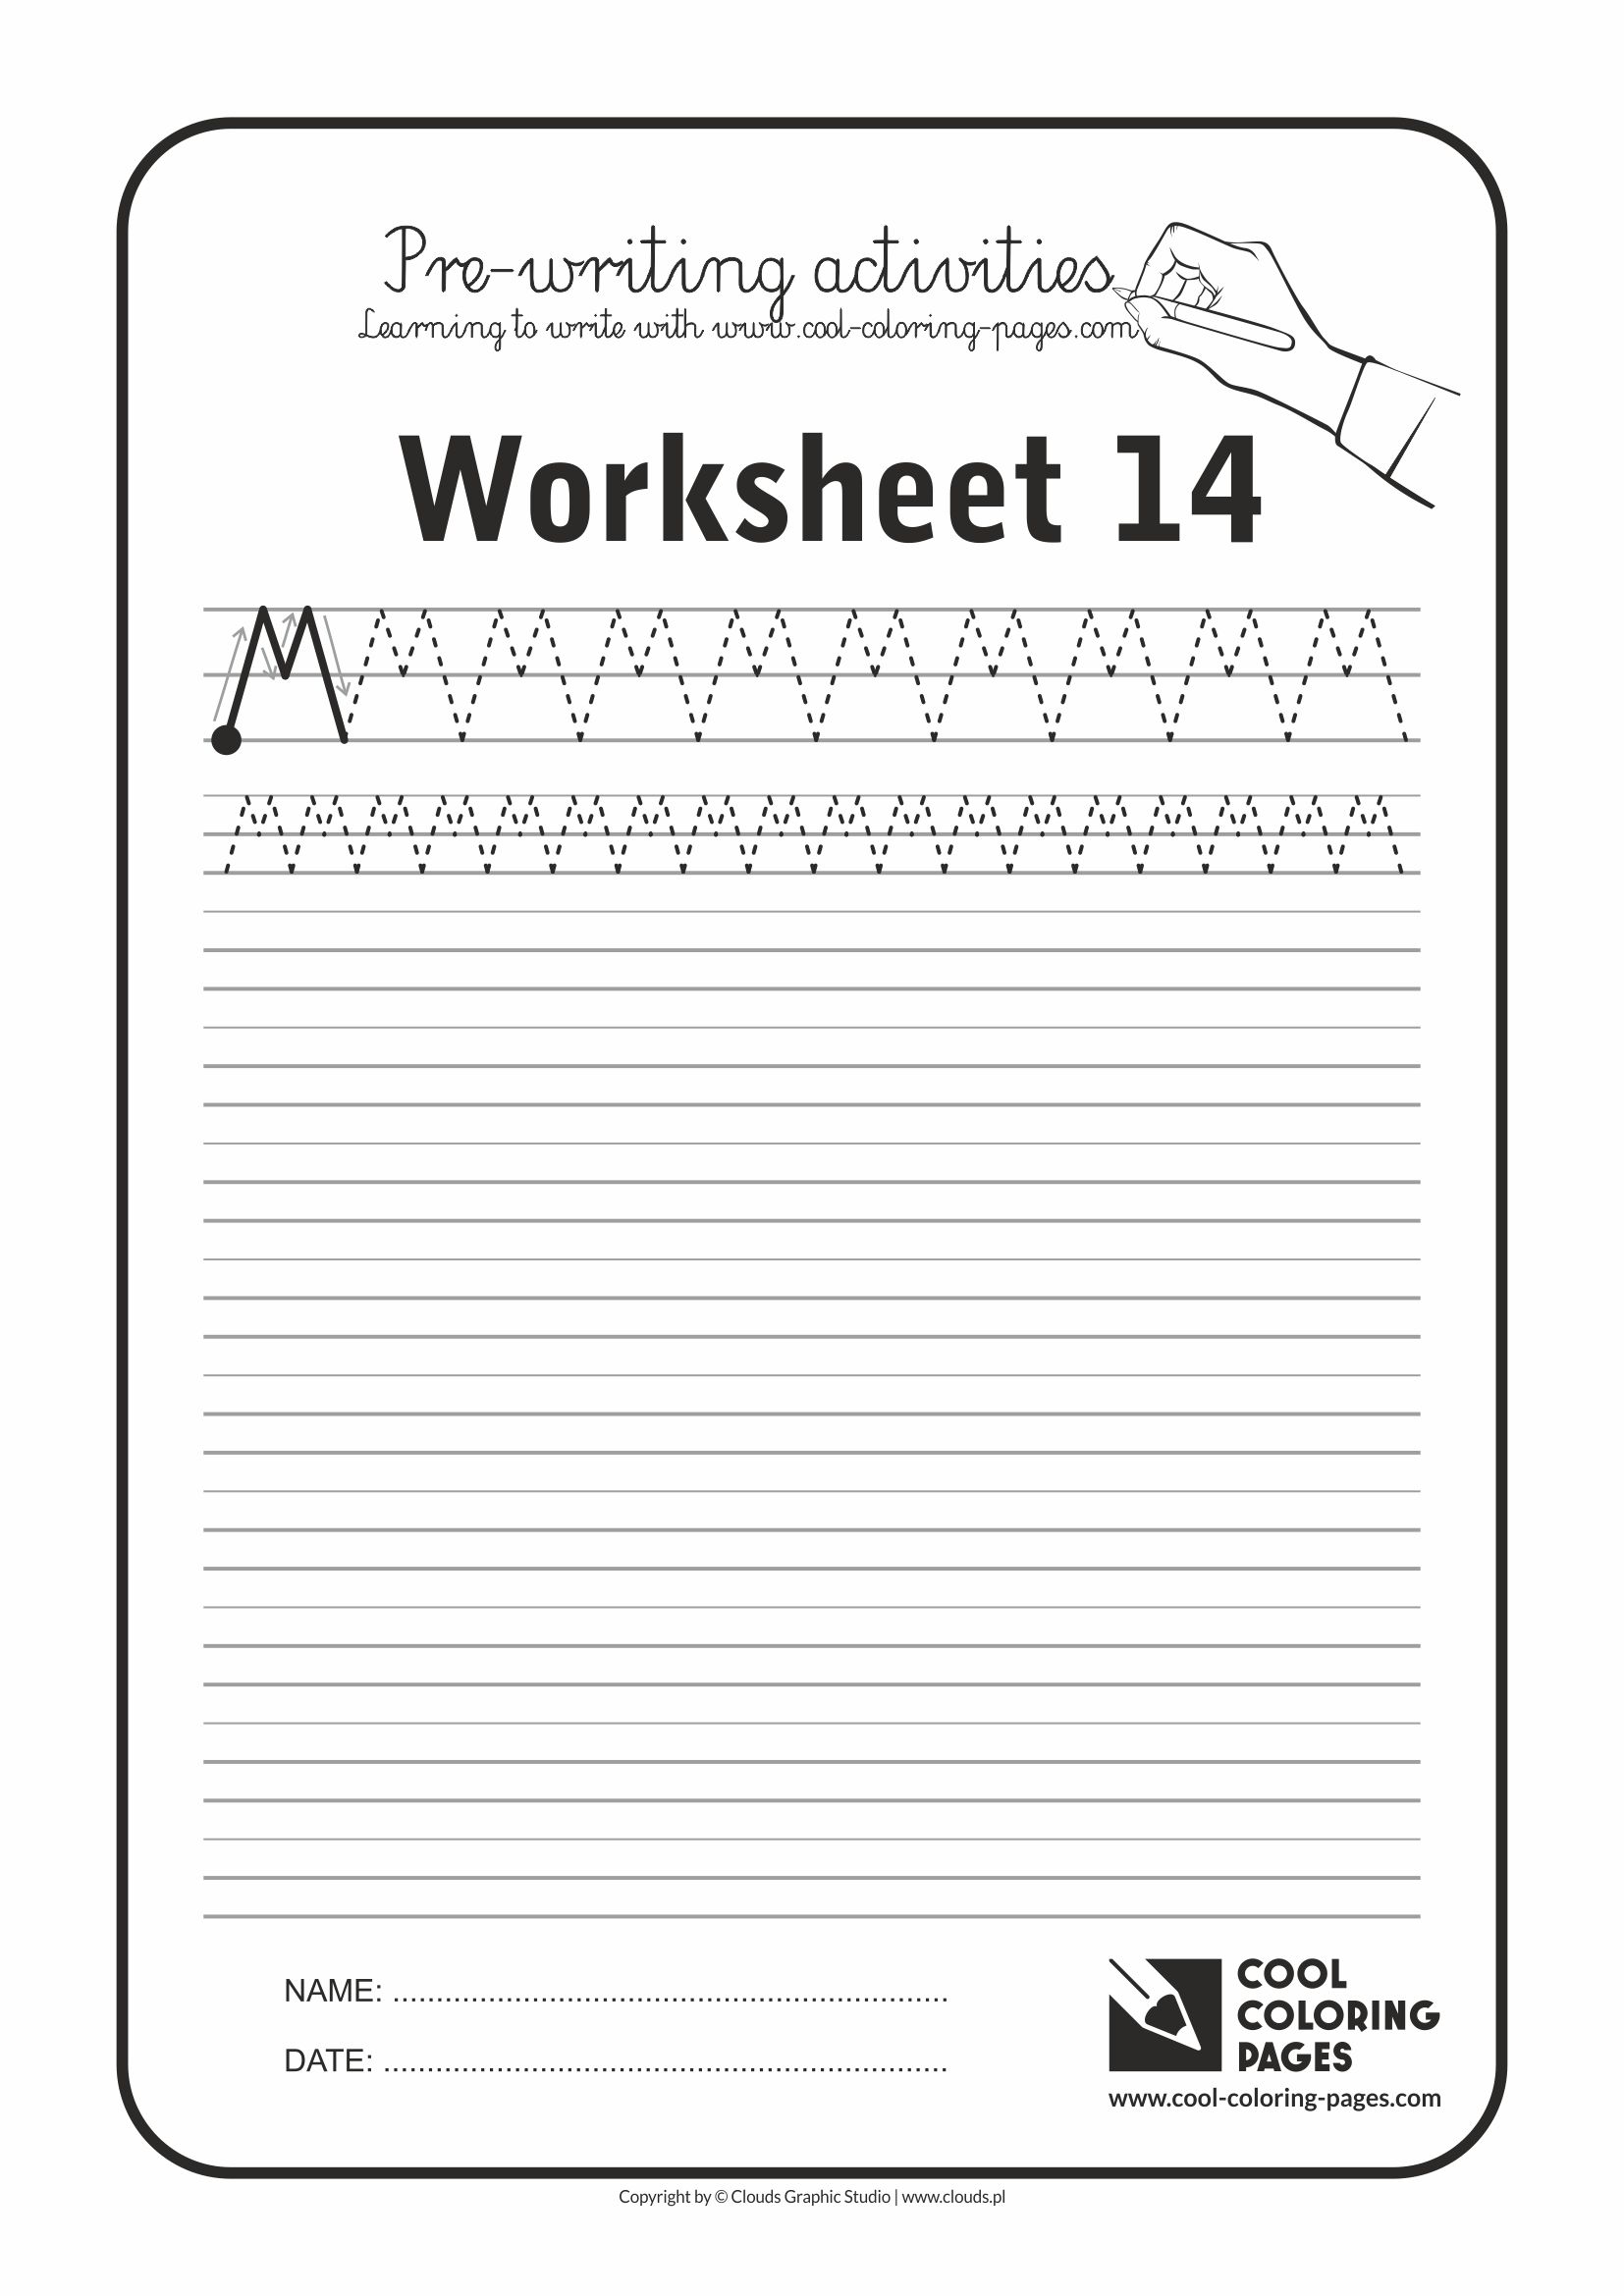 Cool Coloring Pages / Pre-writing activities / Worksheet no.14